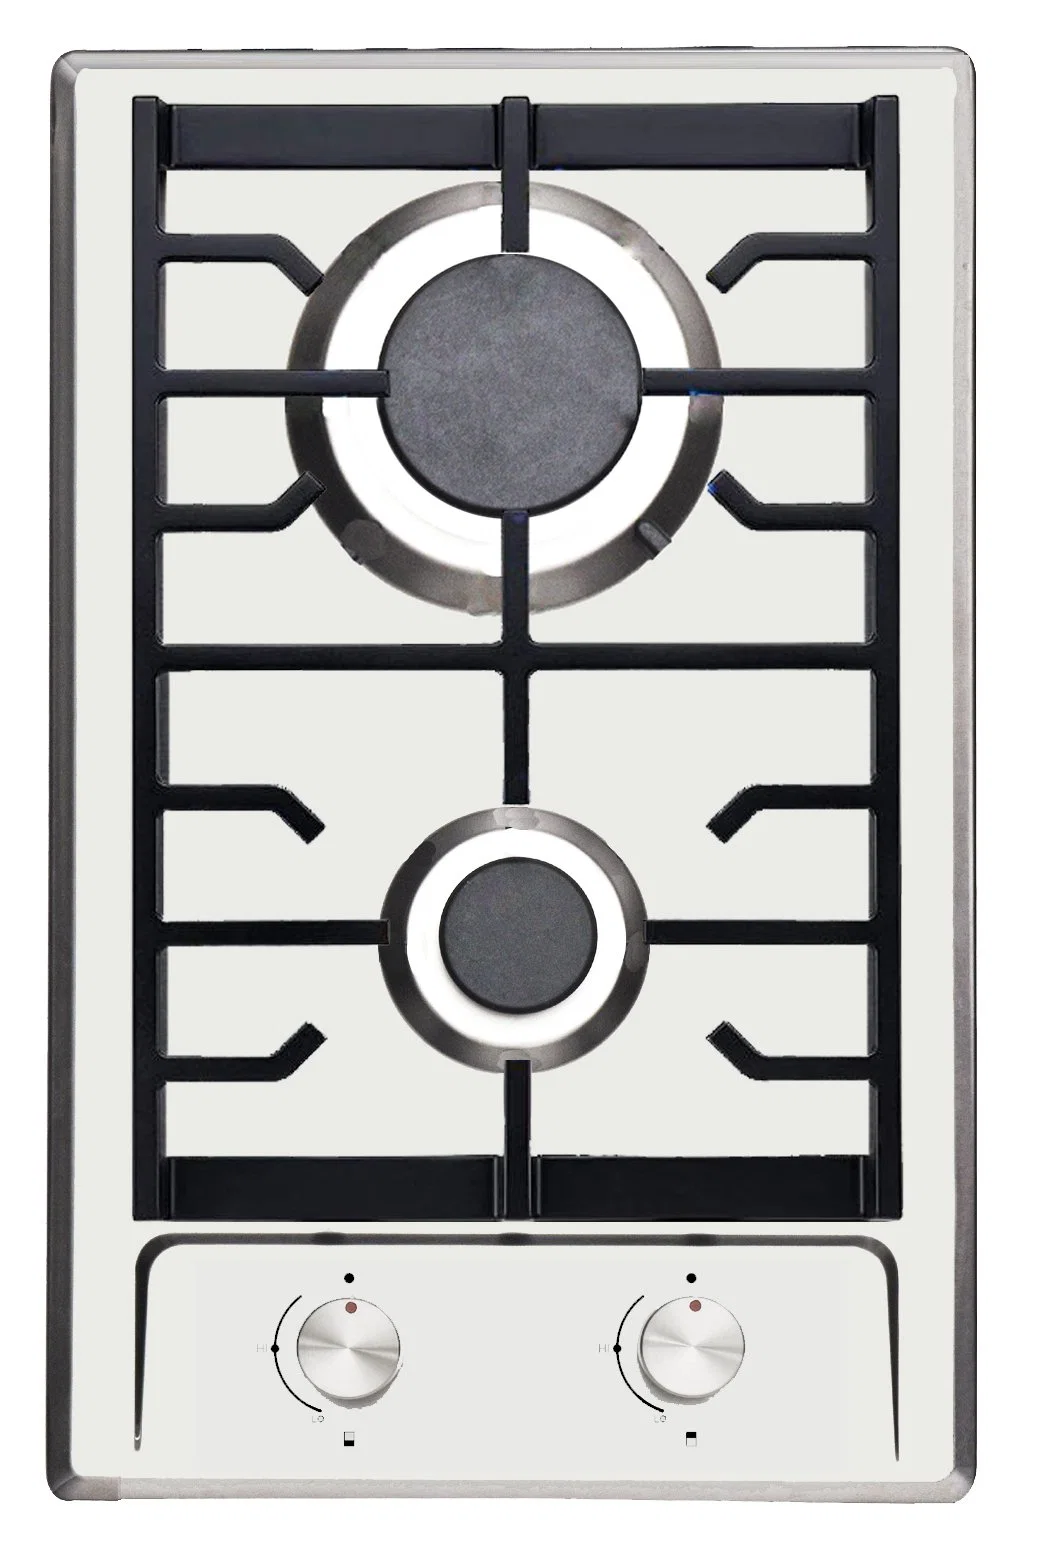 310mm Build-in Gas Stove Cooking Cast Iron Kitchen Appliances